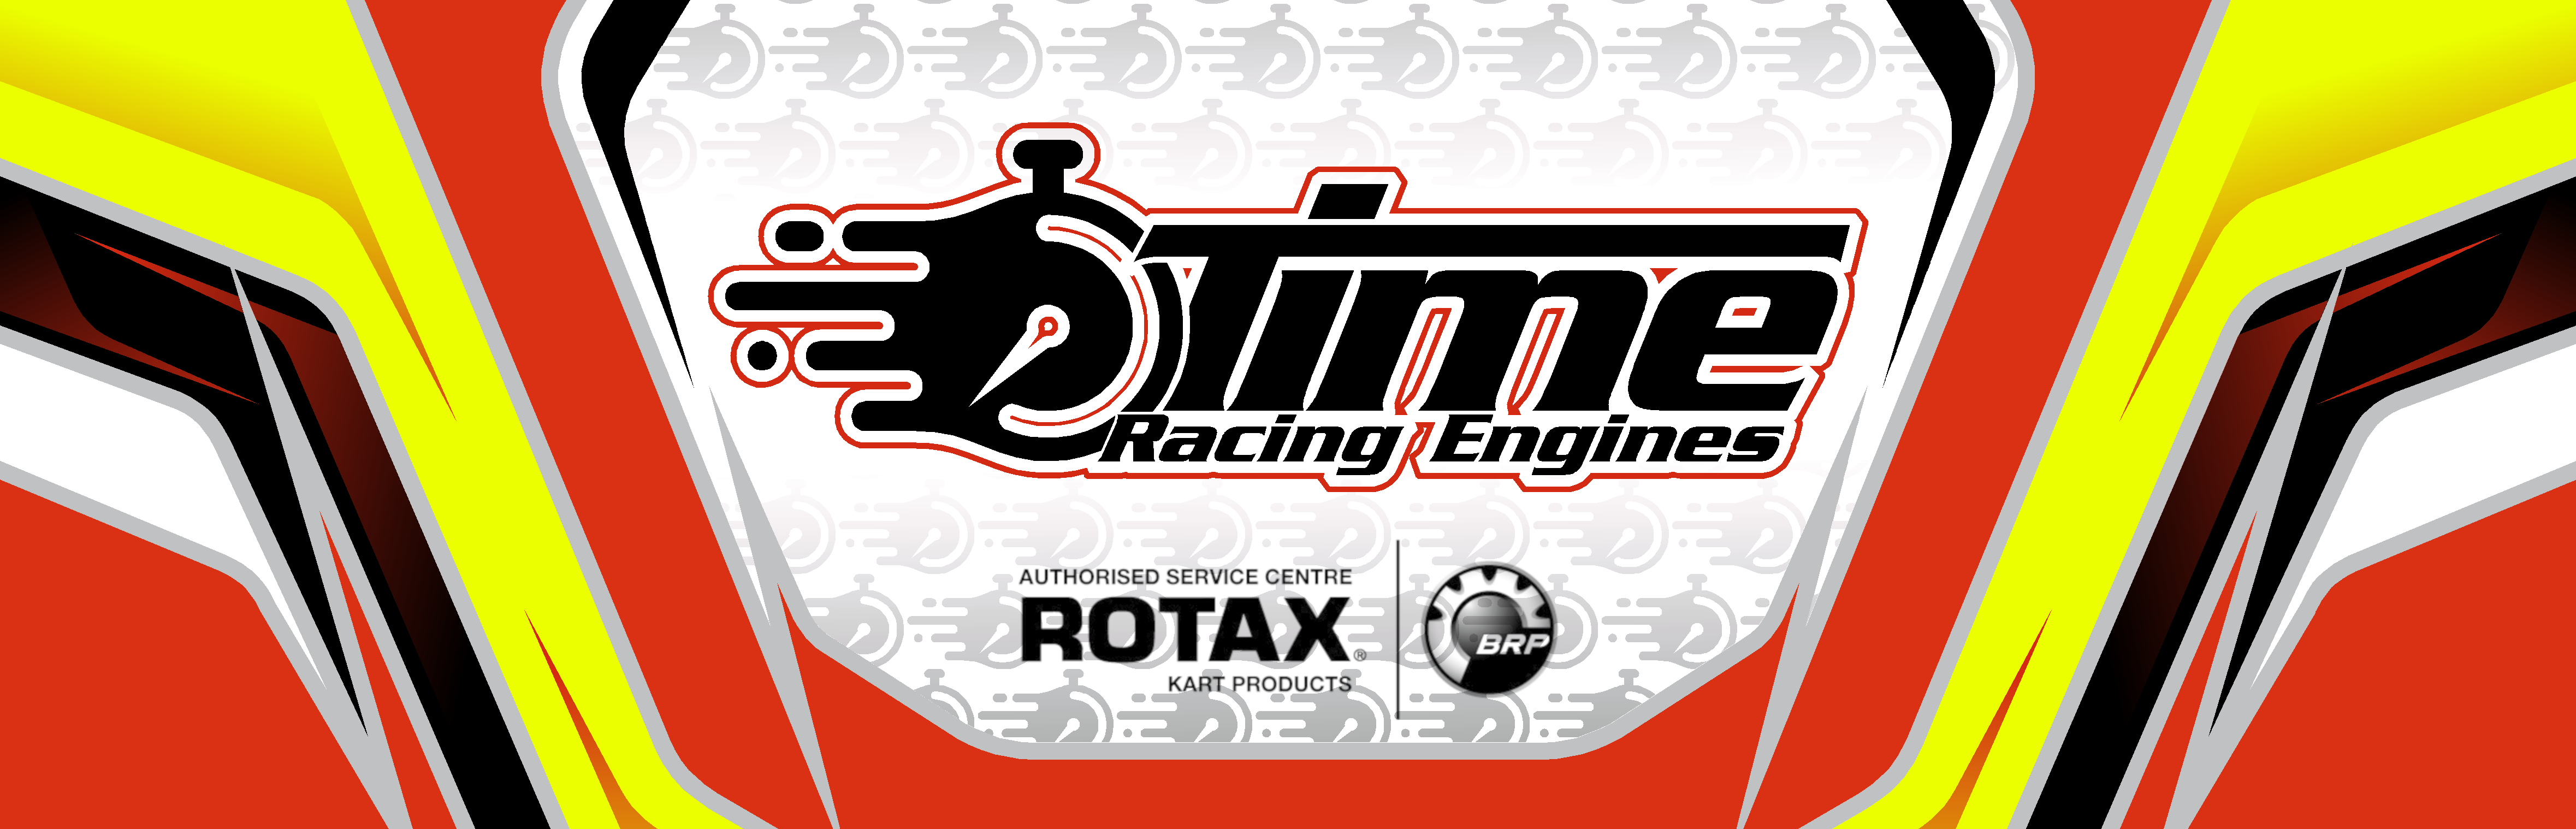 images/index/2Time_Racing_Engines_Web_rasc_wide.png